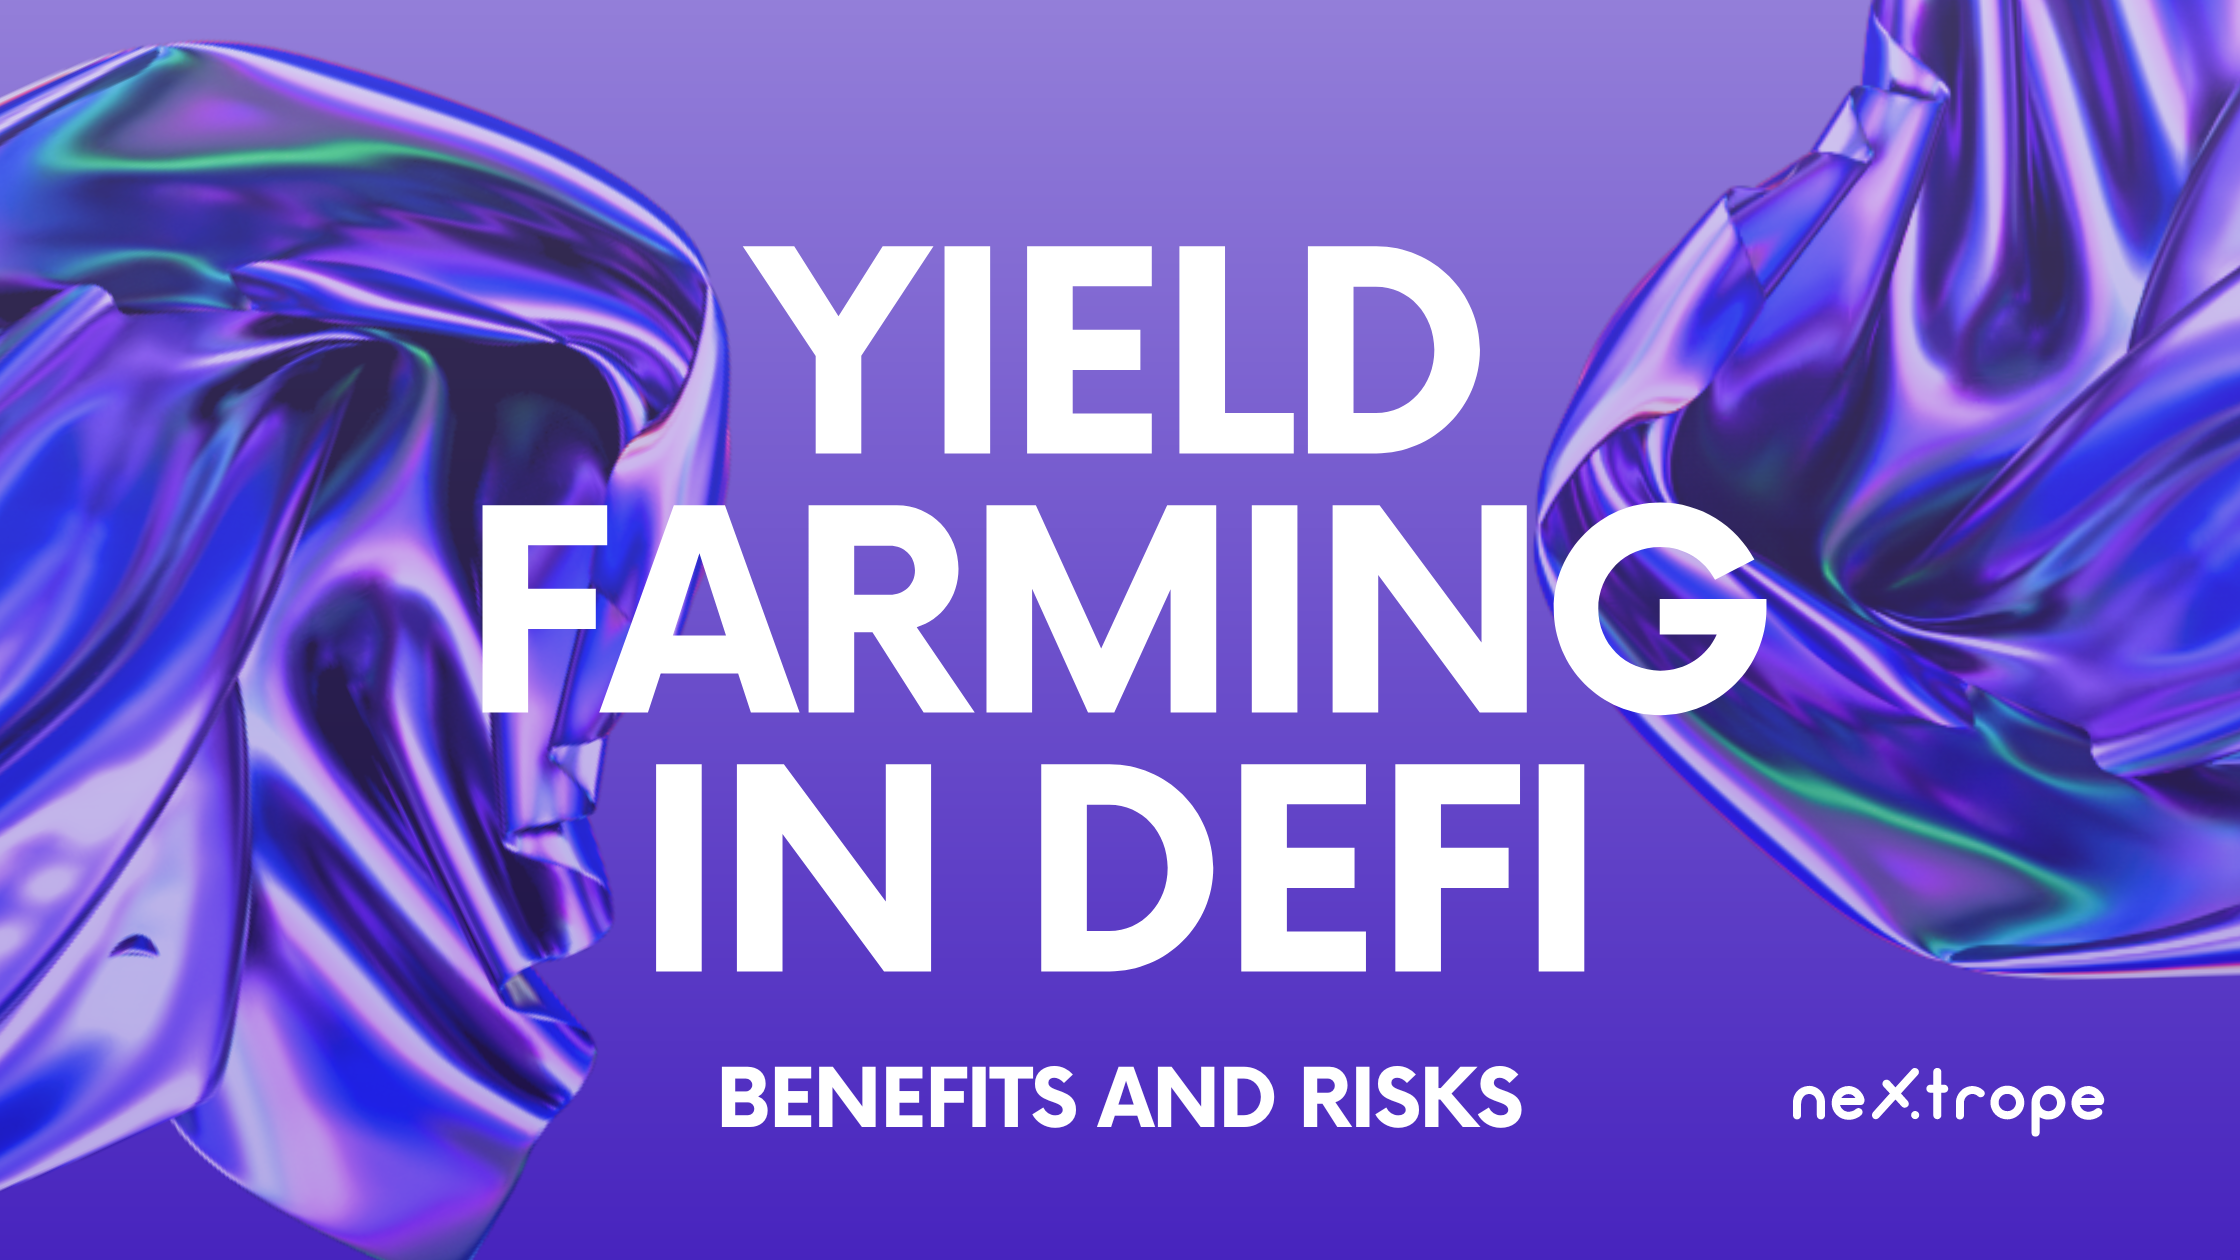 The Benefits and Risks of Yield Farming in DeFi